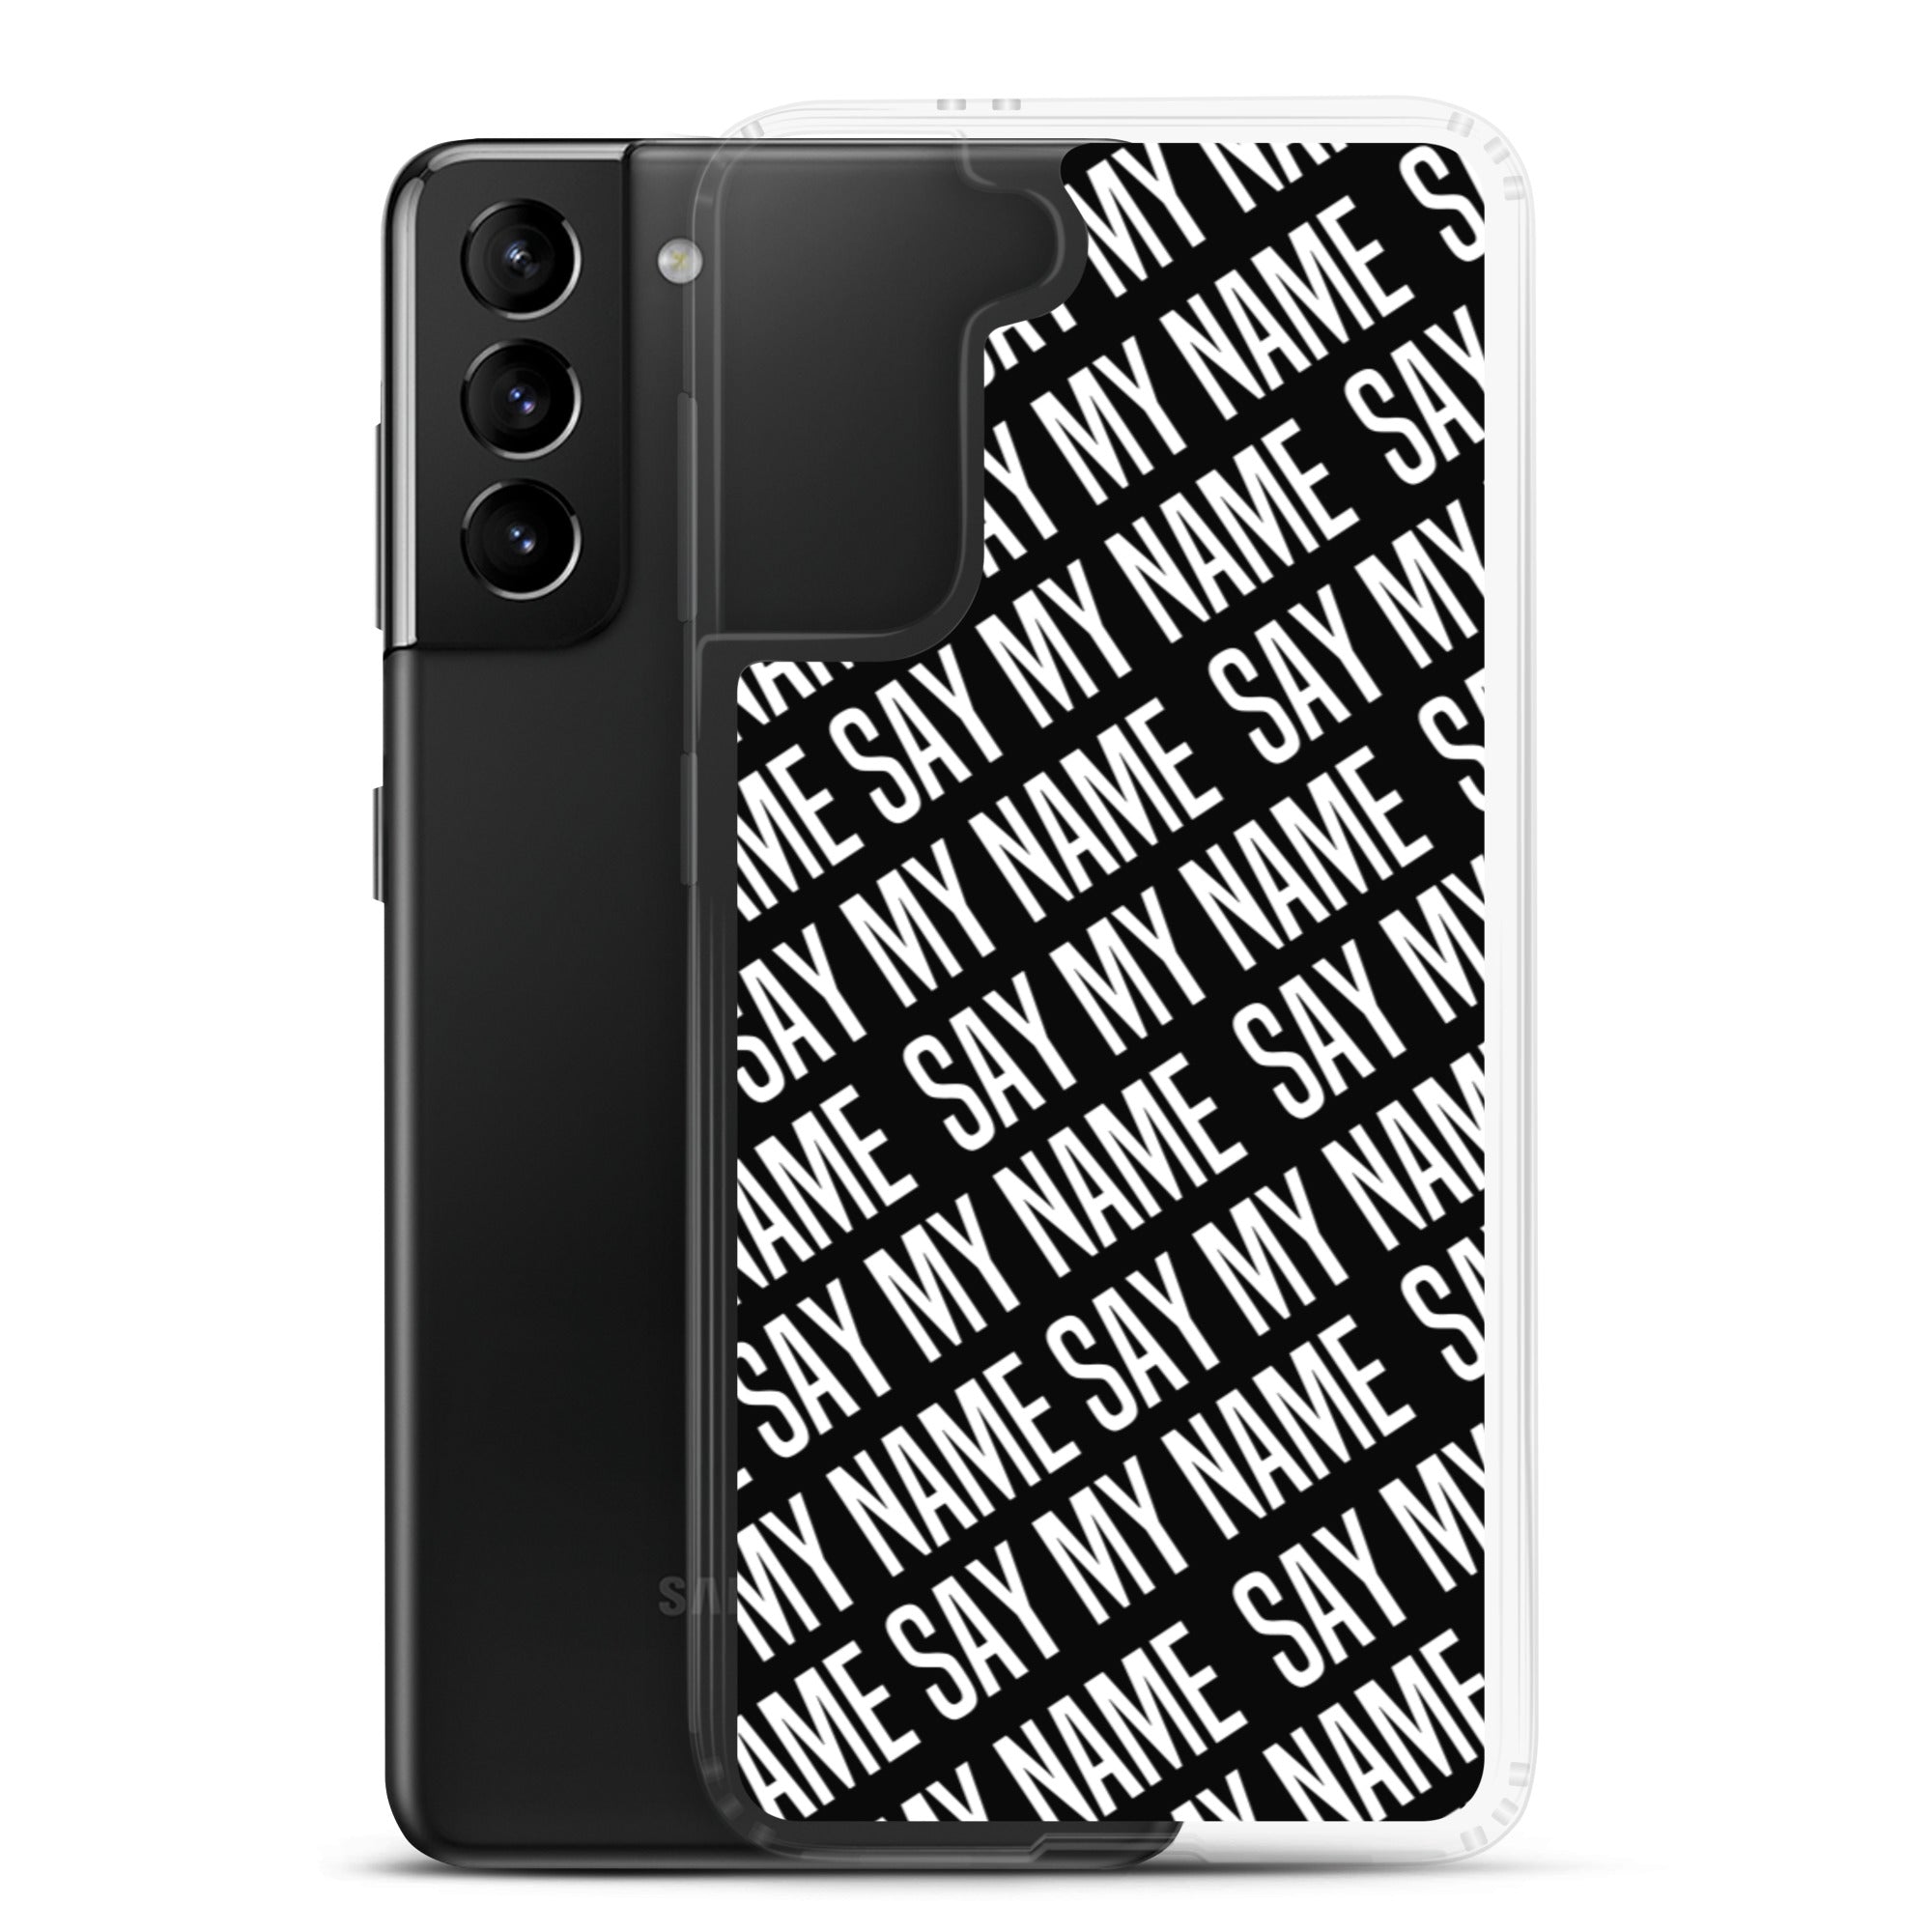 SAY MY NAME Samsung hoesje